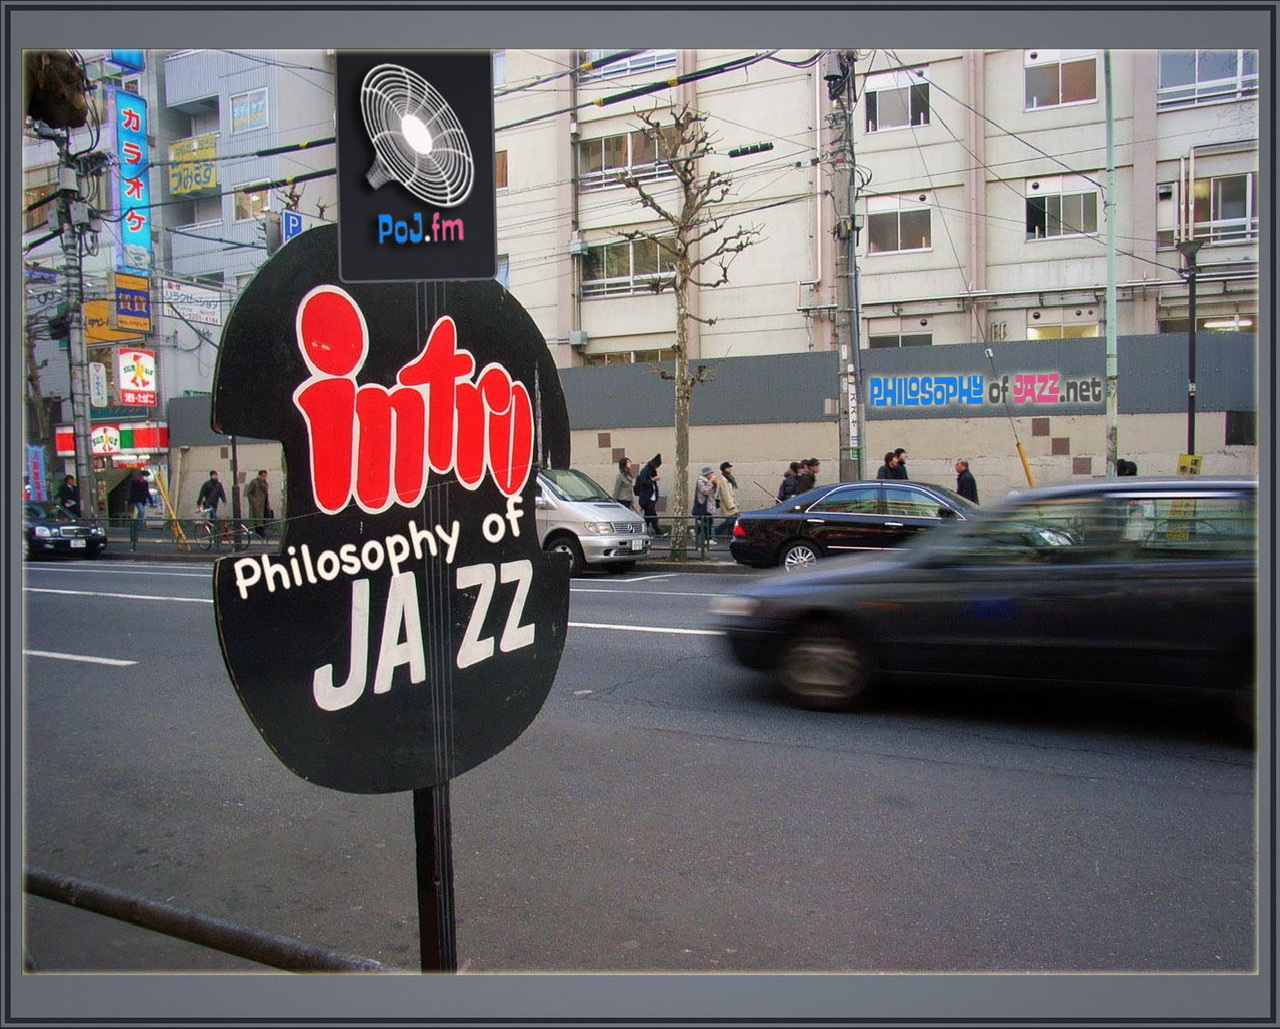 A colored photograph of a metal street sign with the words "Intro" and "Philosophy of Jazz" with PoJ.fm logos.